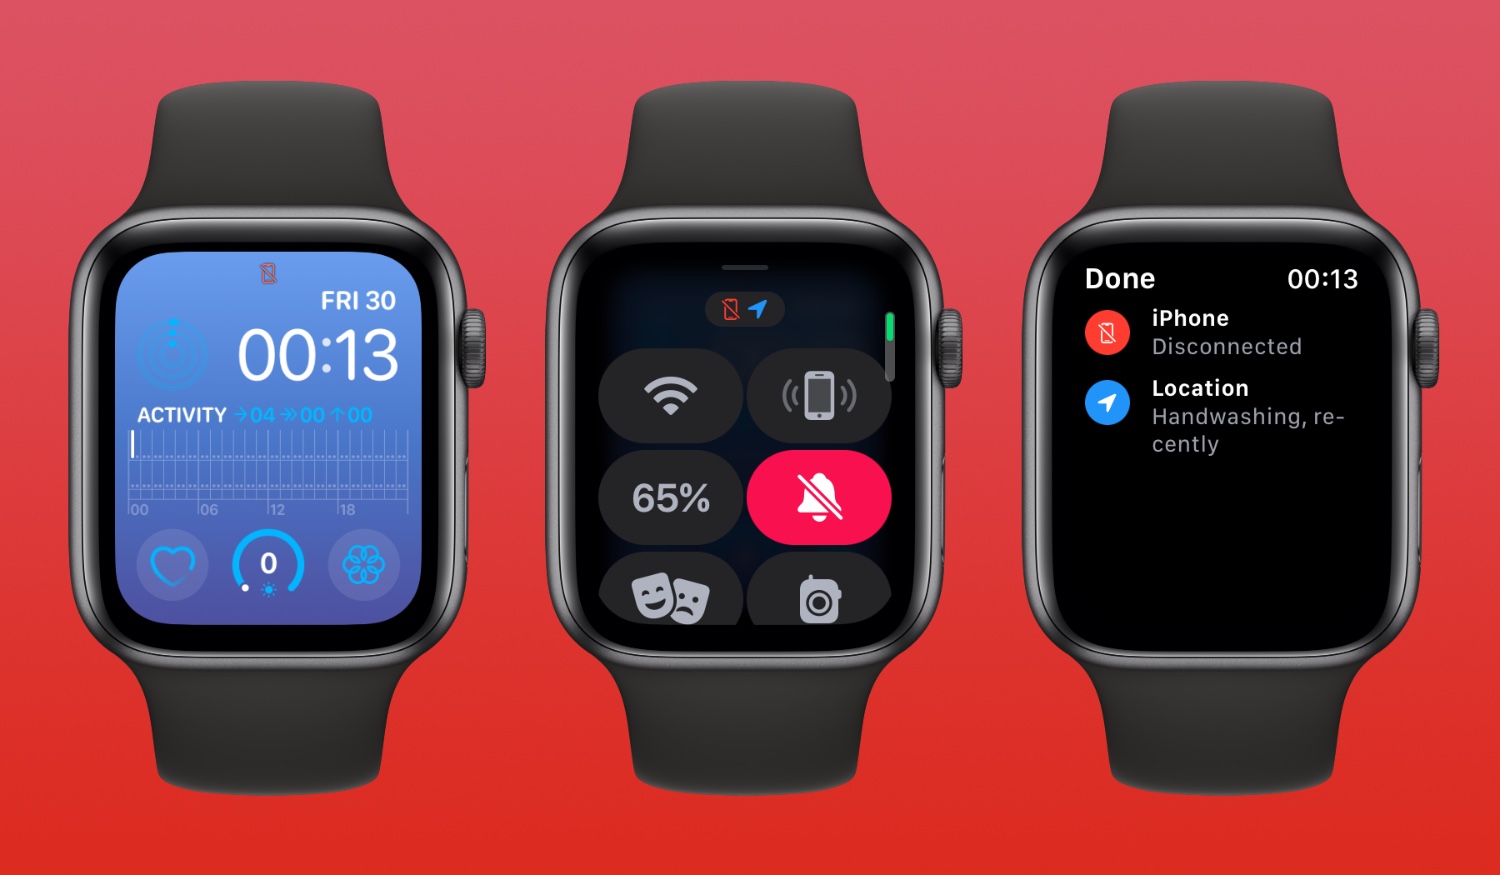 Apple Watch Disconnected From iPhone? Try These Fixes